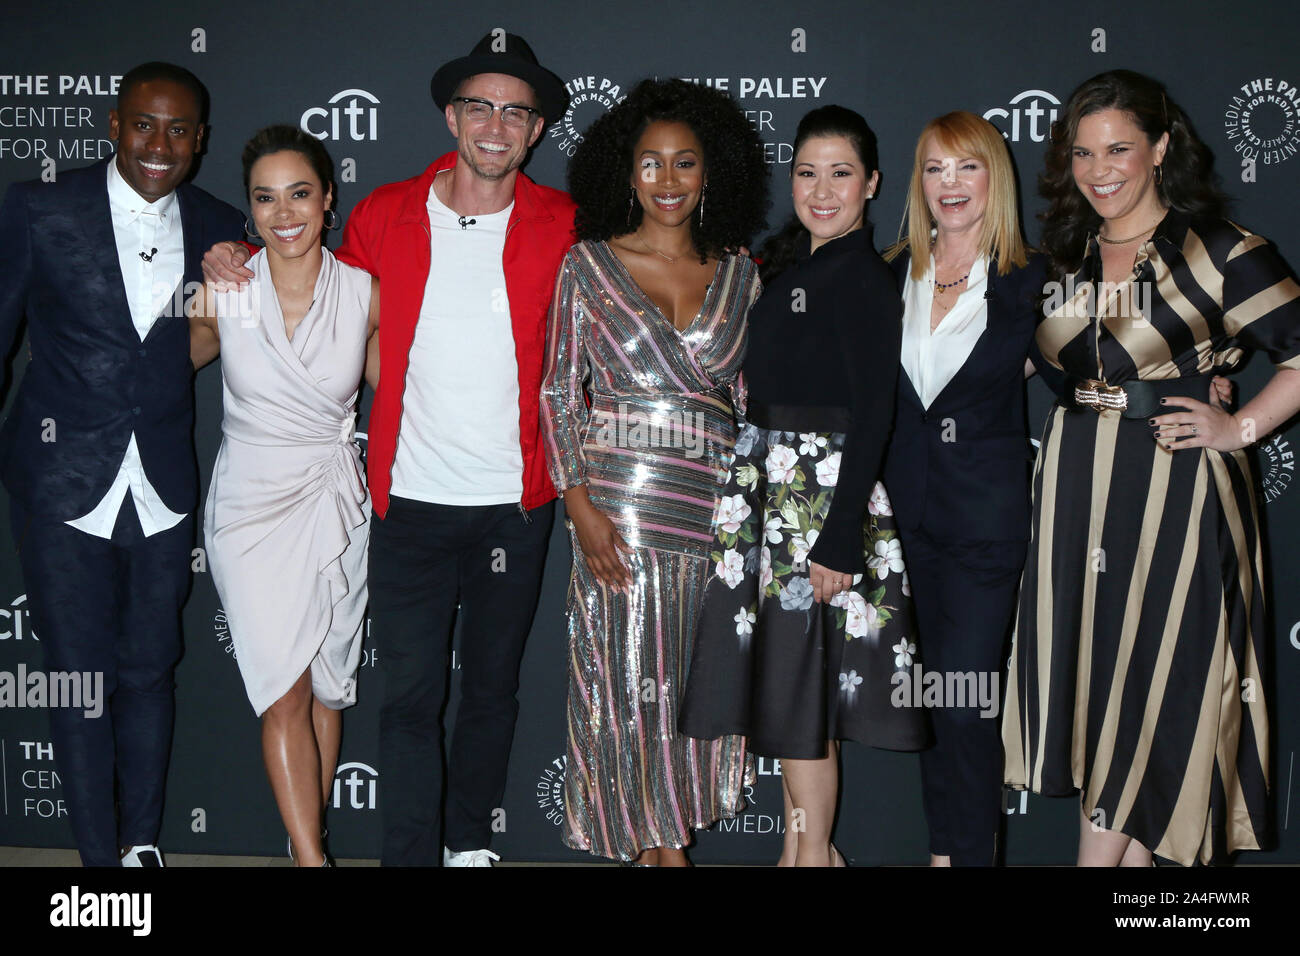 2019 PaleyFest Fall TV Previews - CBS at the Paley Center for Media on September 12, 2019 in Beverly Hills, CA Featuring: All Rise Cast, J. Alex Brinson, Jessica Camacho, Wilson Bethel, Simone Missick, Ruthie Ann Miles, Marg Helgenberger, Lindsay Mendez Where: Beverly Hills, California, United States When: 13 Sep 2019 Credit: Nicky Nelson/WENN.com Stock Photo